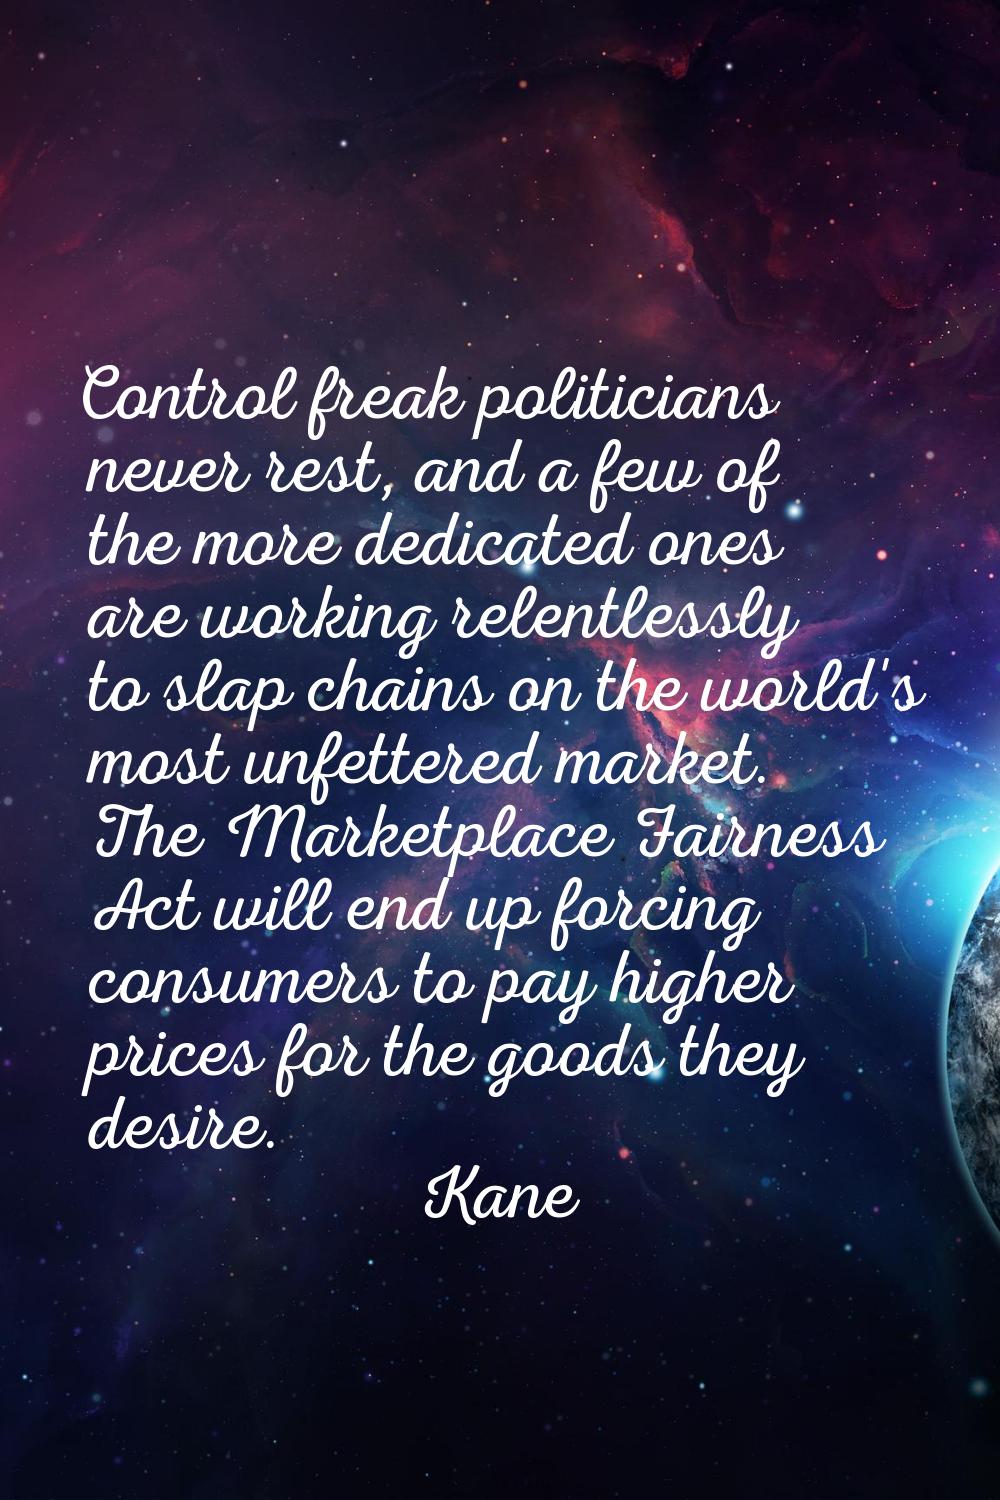 Control freak politicians never rest, and a few of the more dedicated ones are working relentlessly